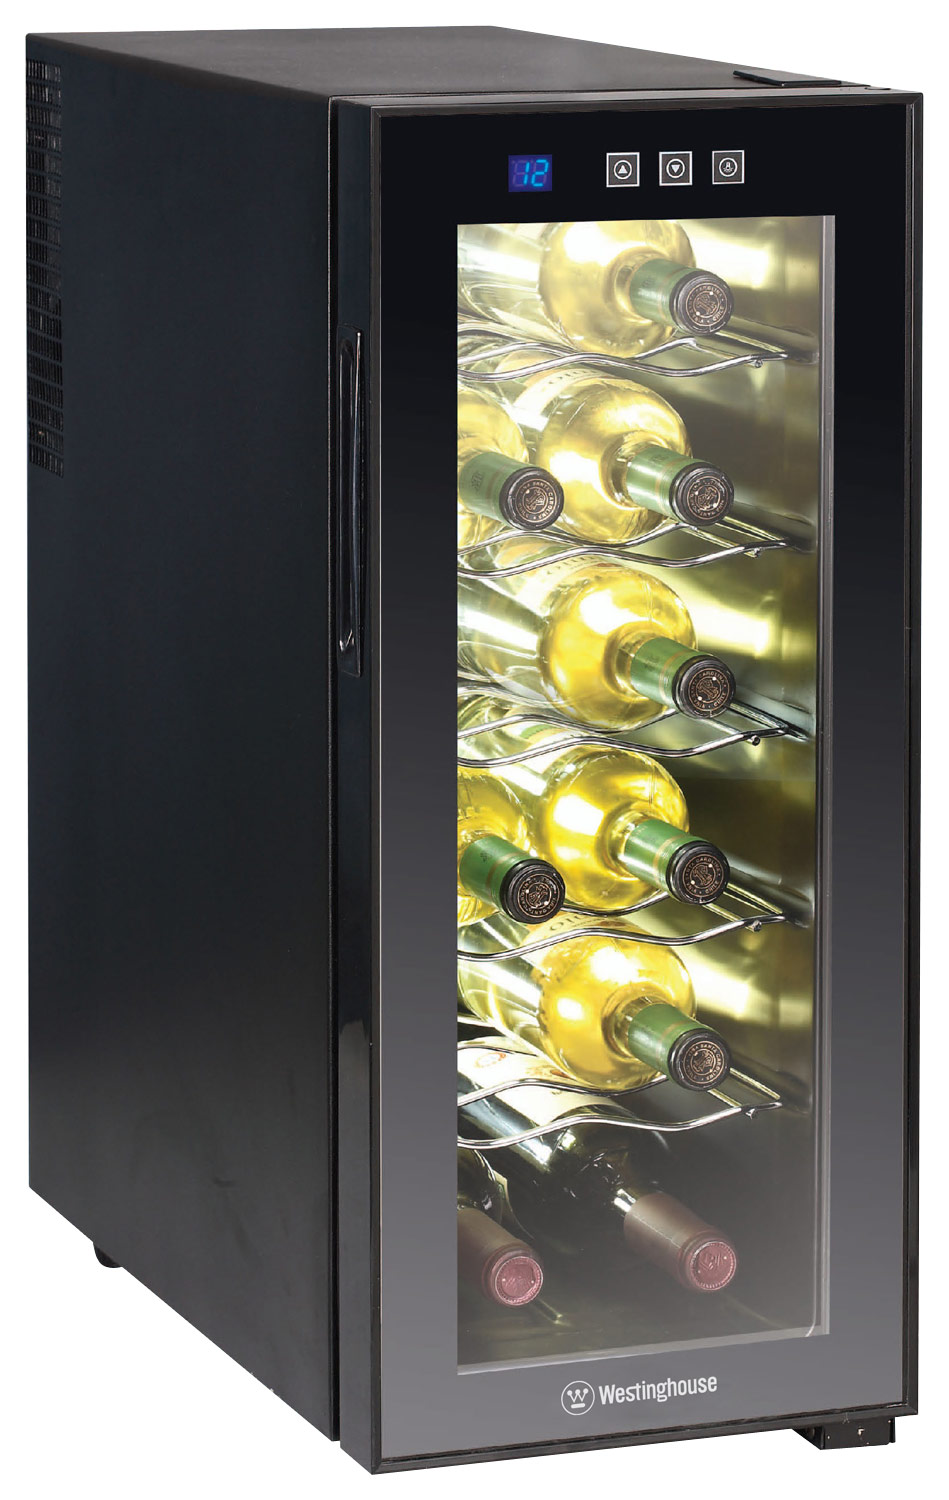 Best Buy: SPT WC-1271 12-Bottle Thermo-Electric Slim Wine Cooler WC-1271